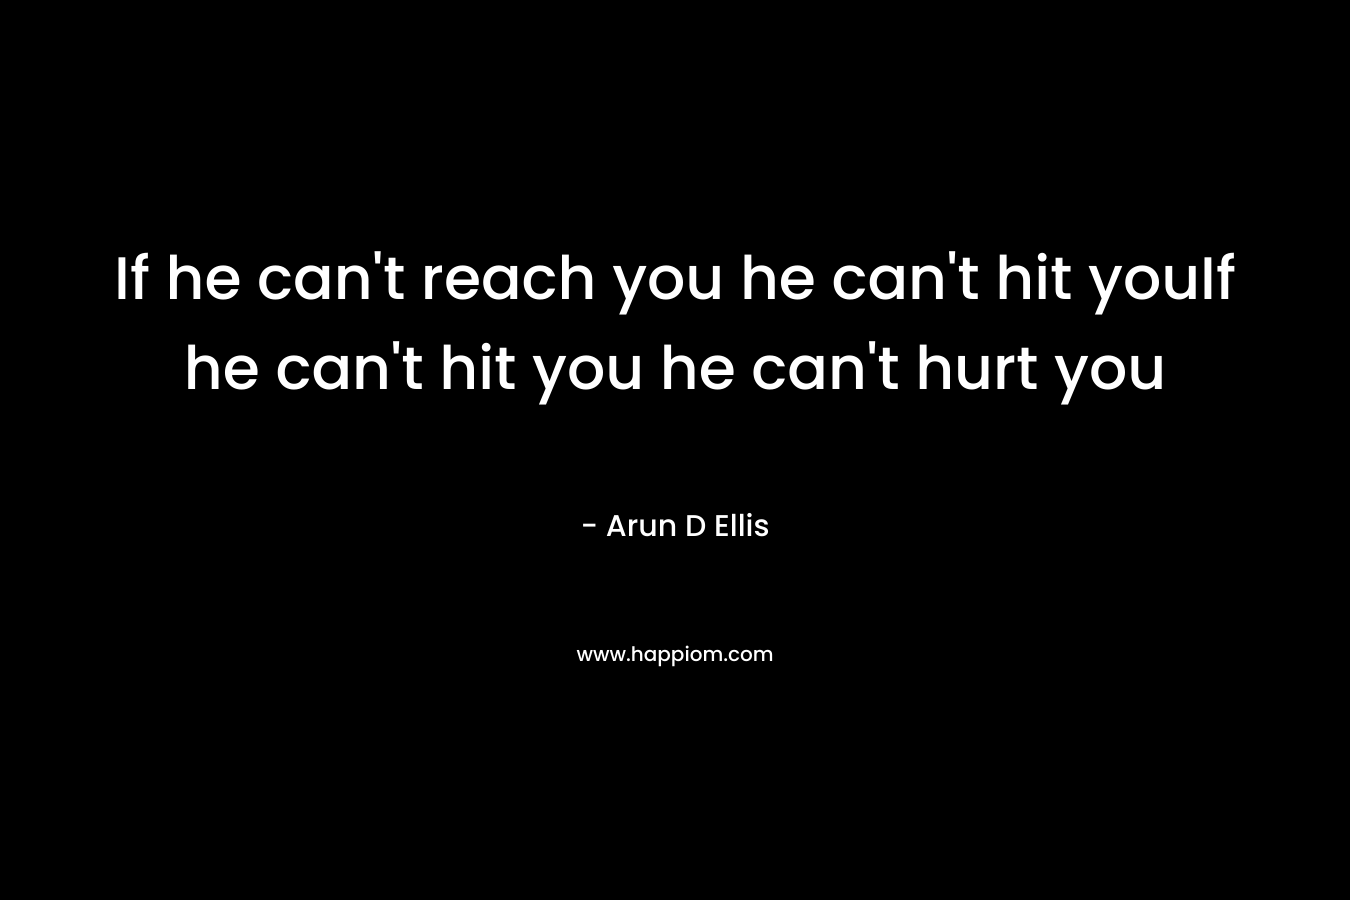 If he can’t reach you he can’t hit youIf he can’t hit you he can’t hurt you – Arun D Ellis